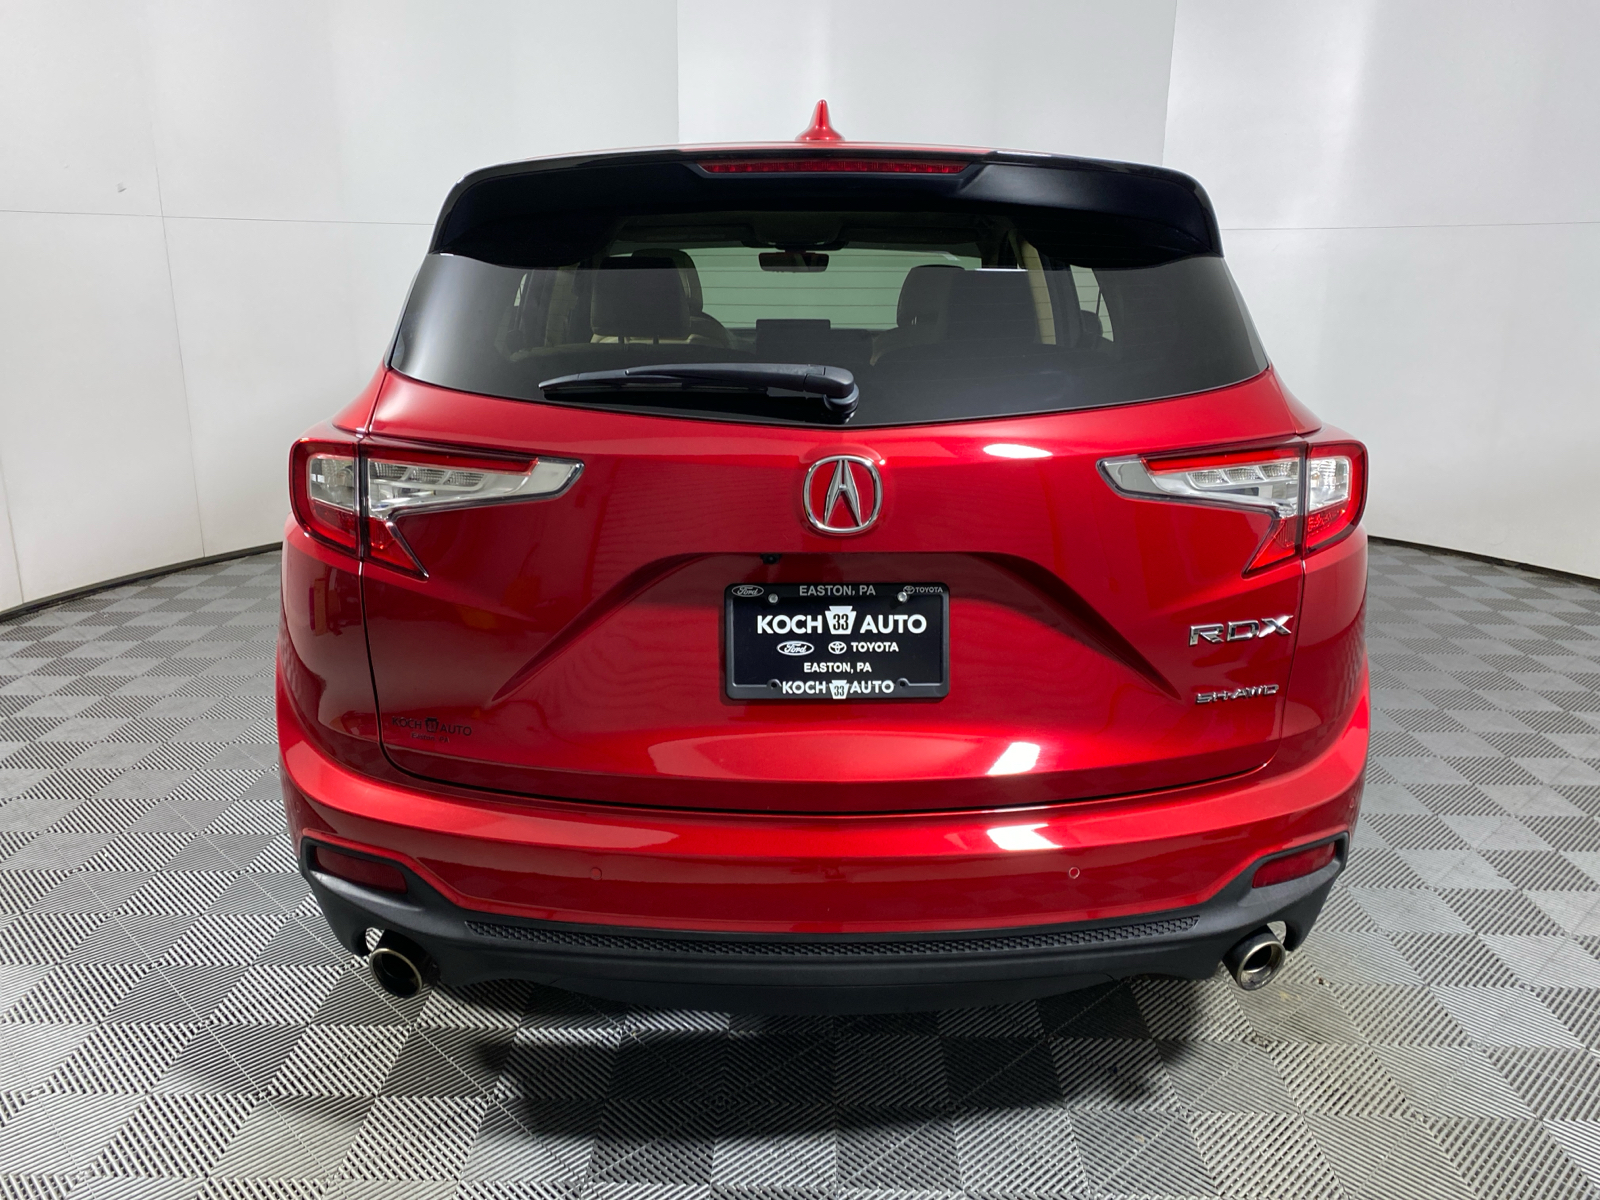 2021 Acura RDX Technology Package 8